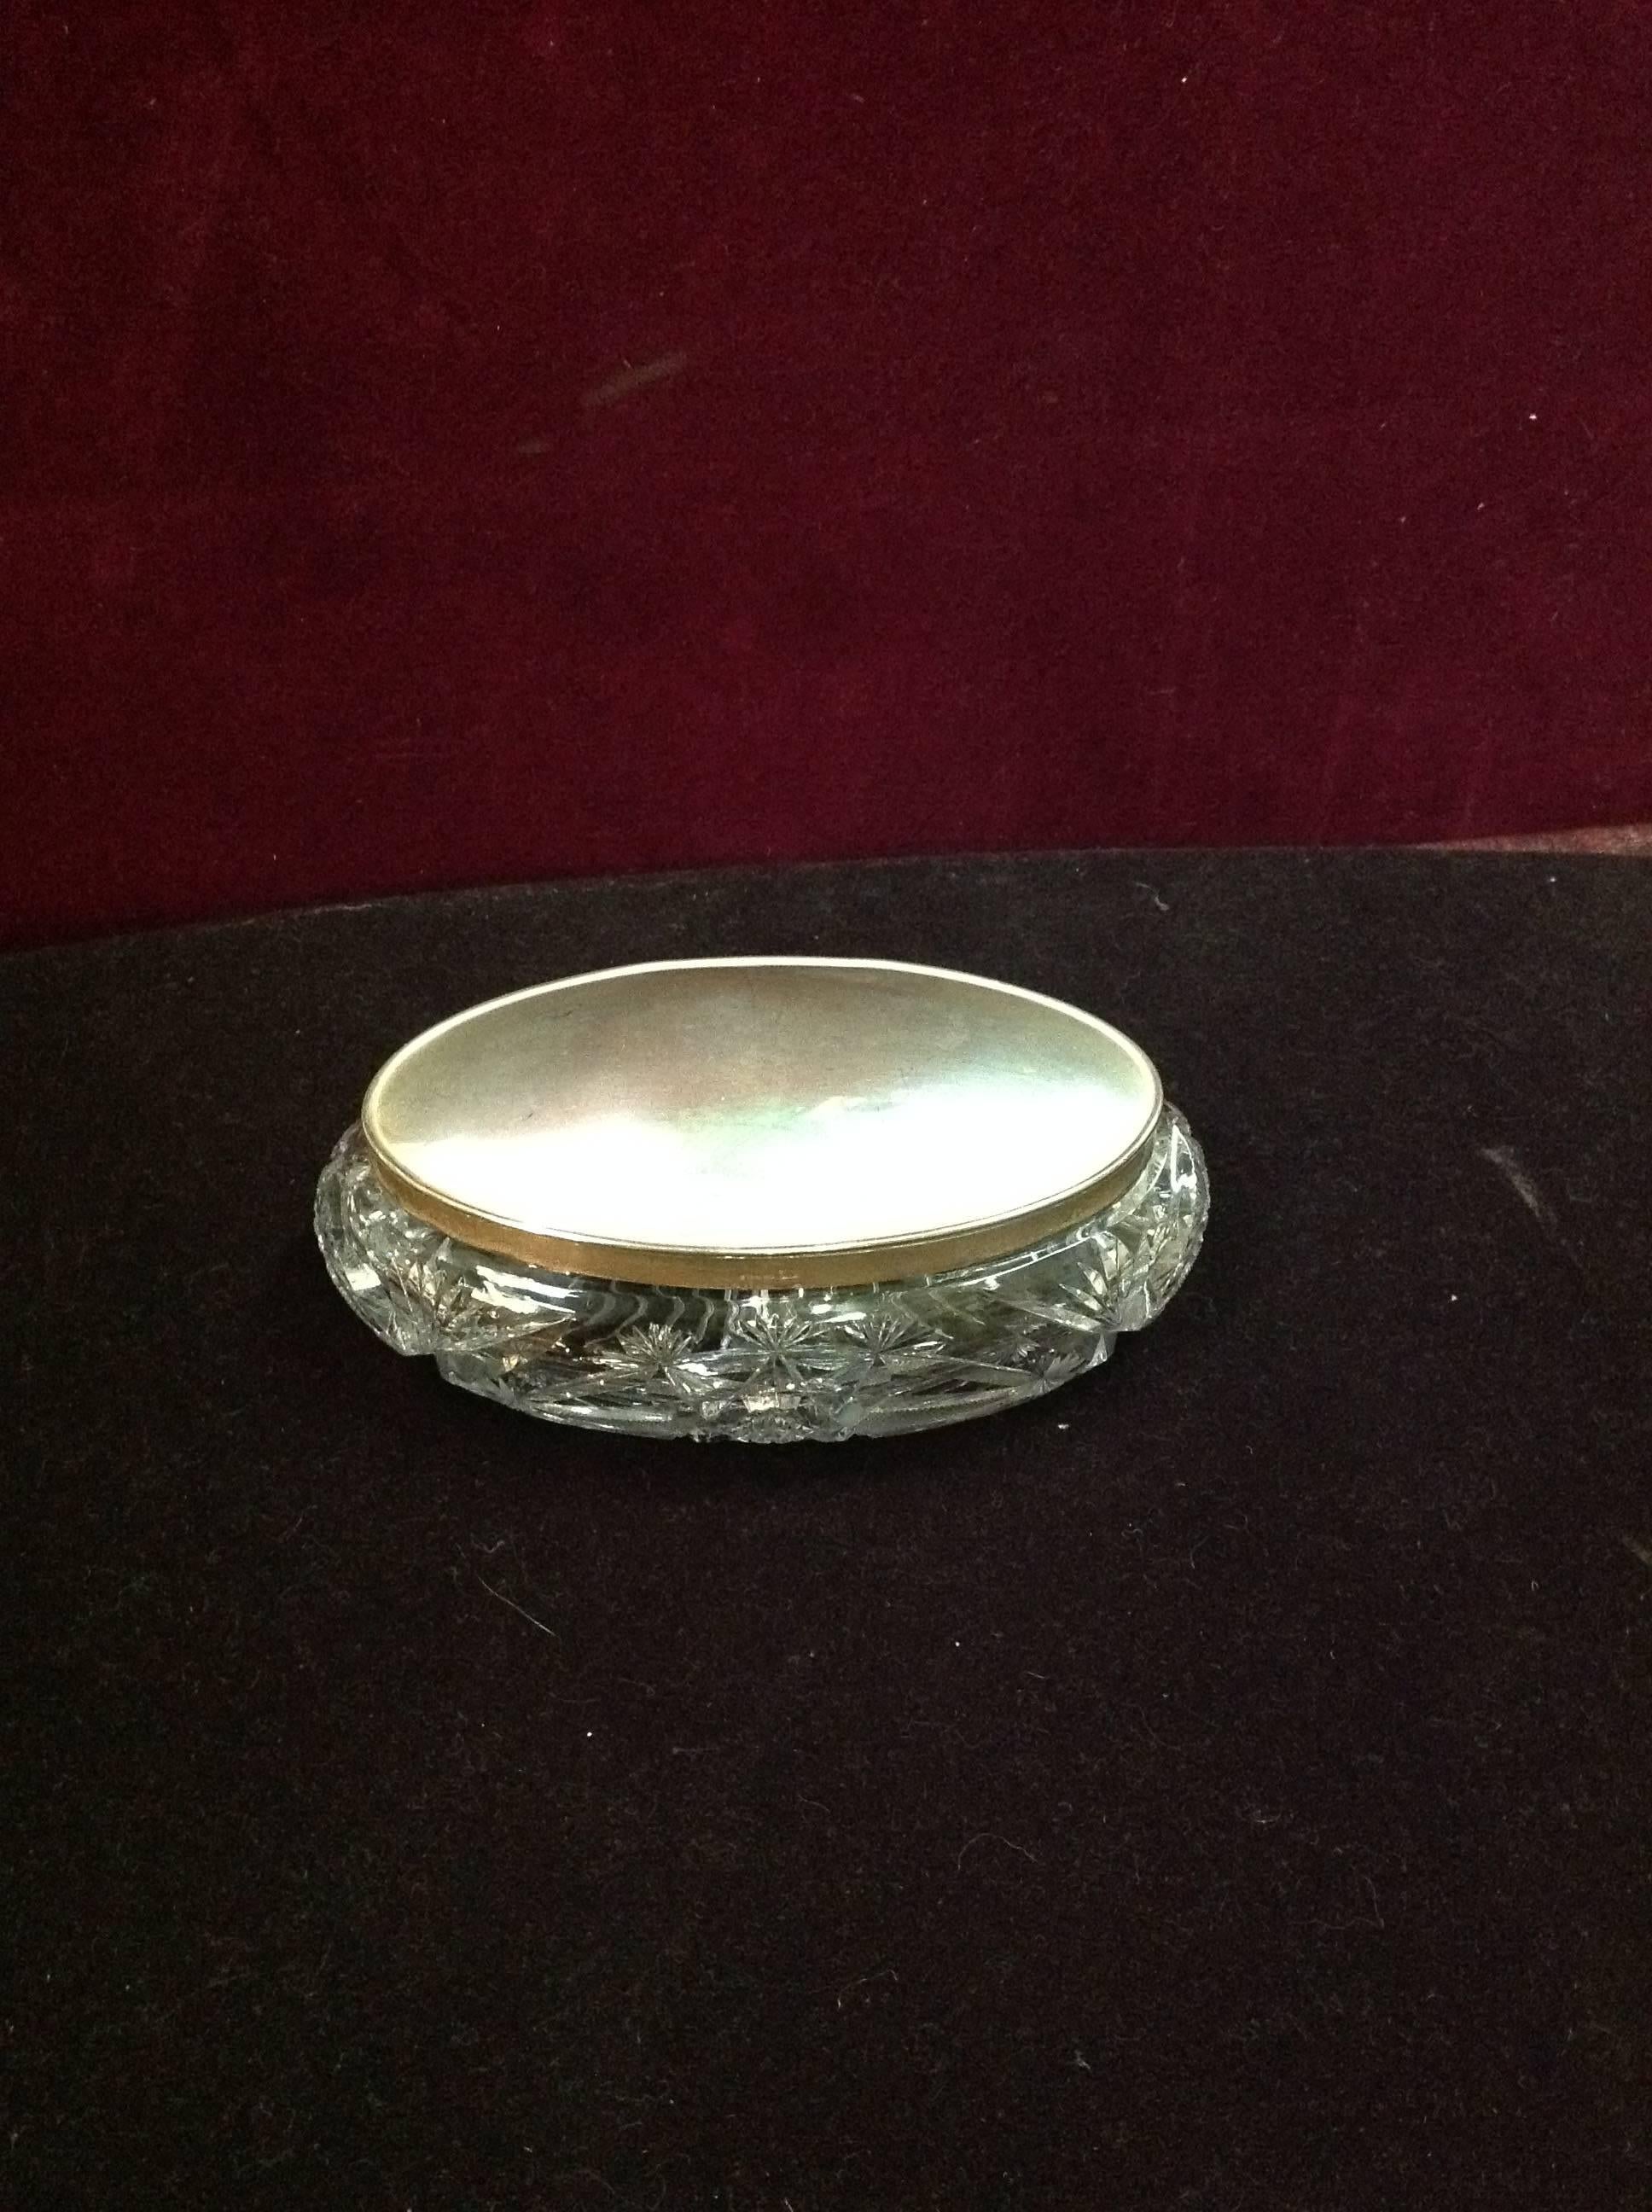 This brilliant cut crystal box with sterling lid is from the early 1900s and marked Sterling.